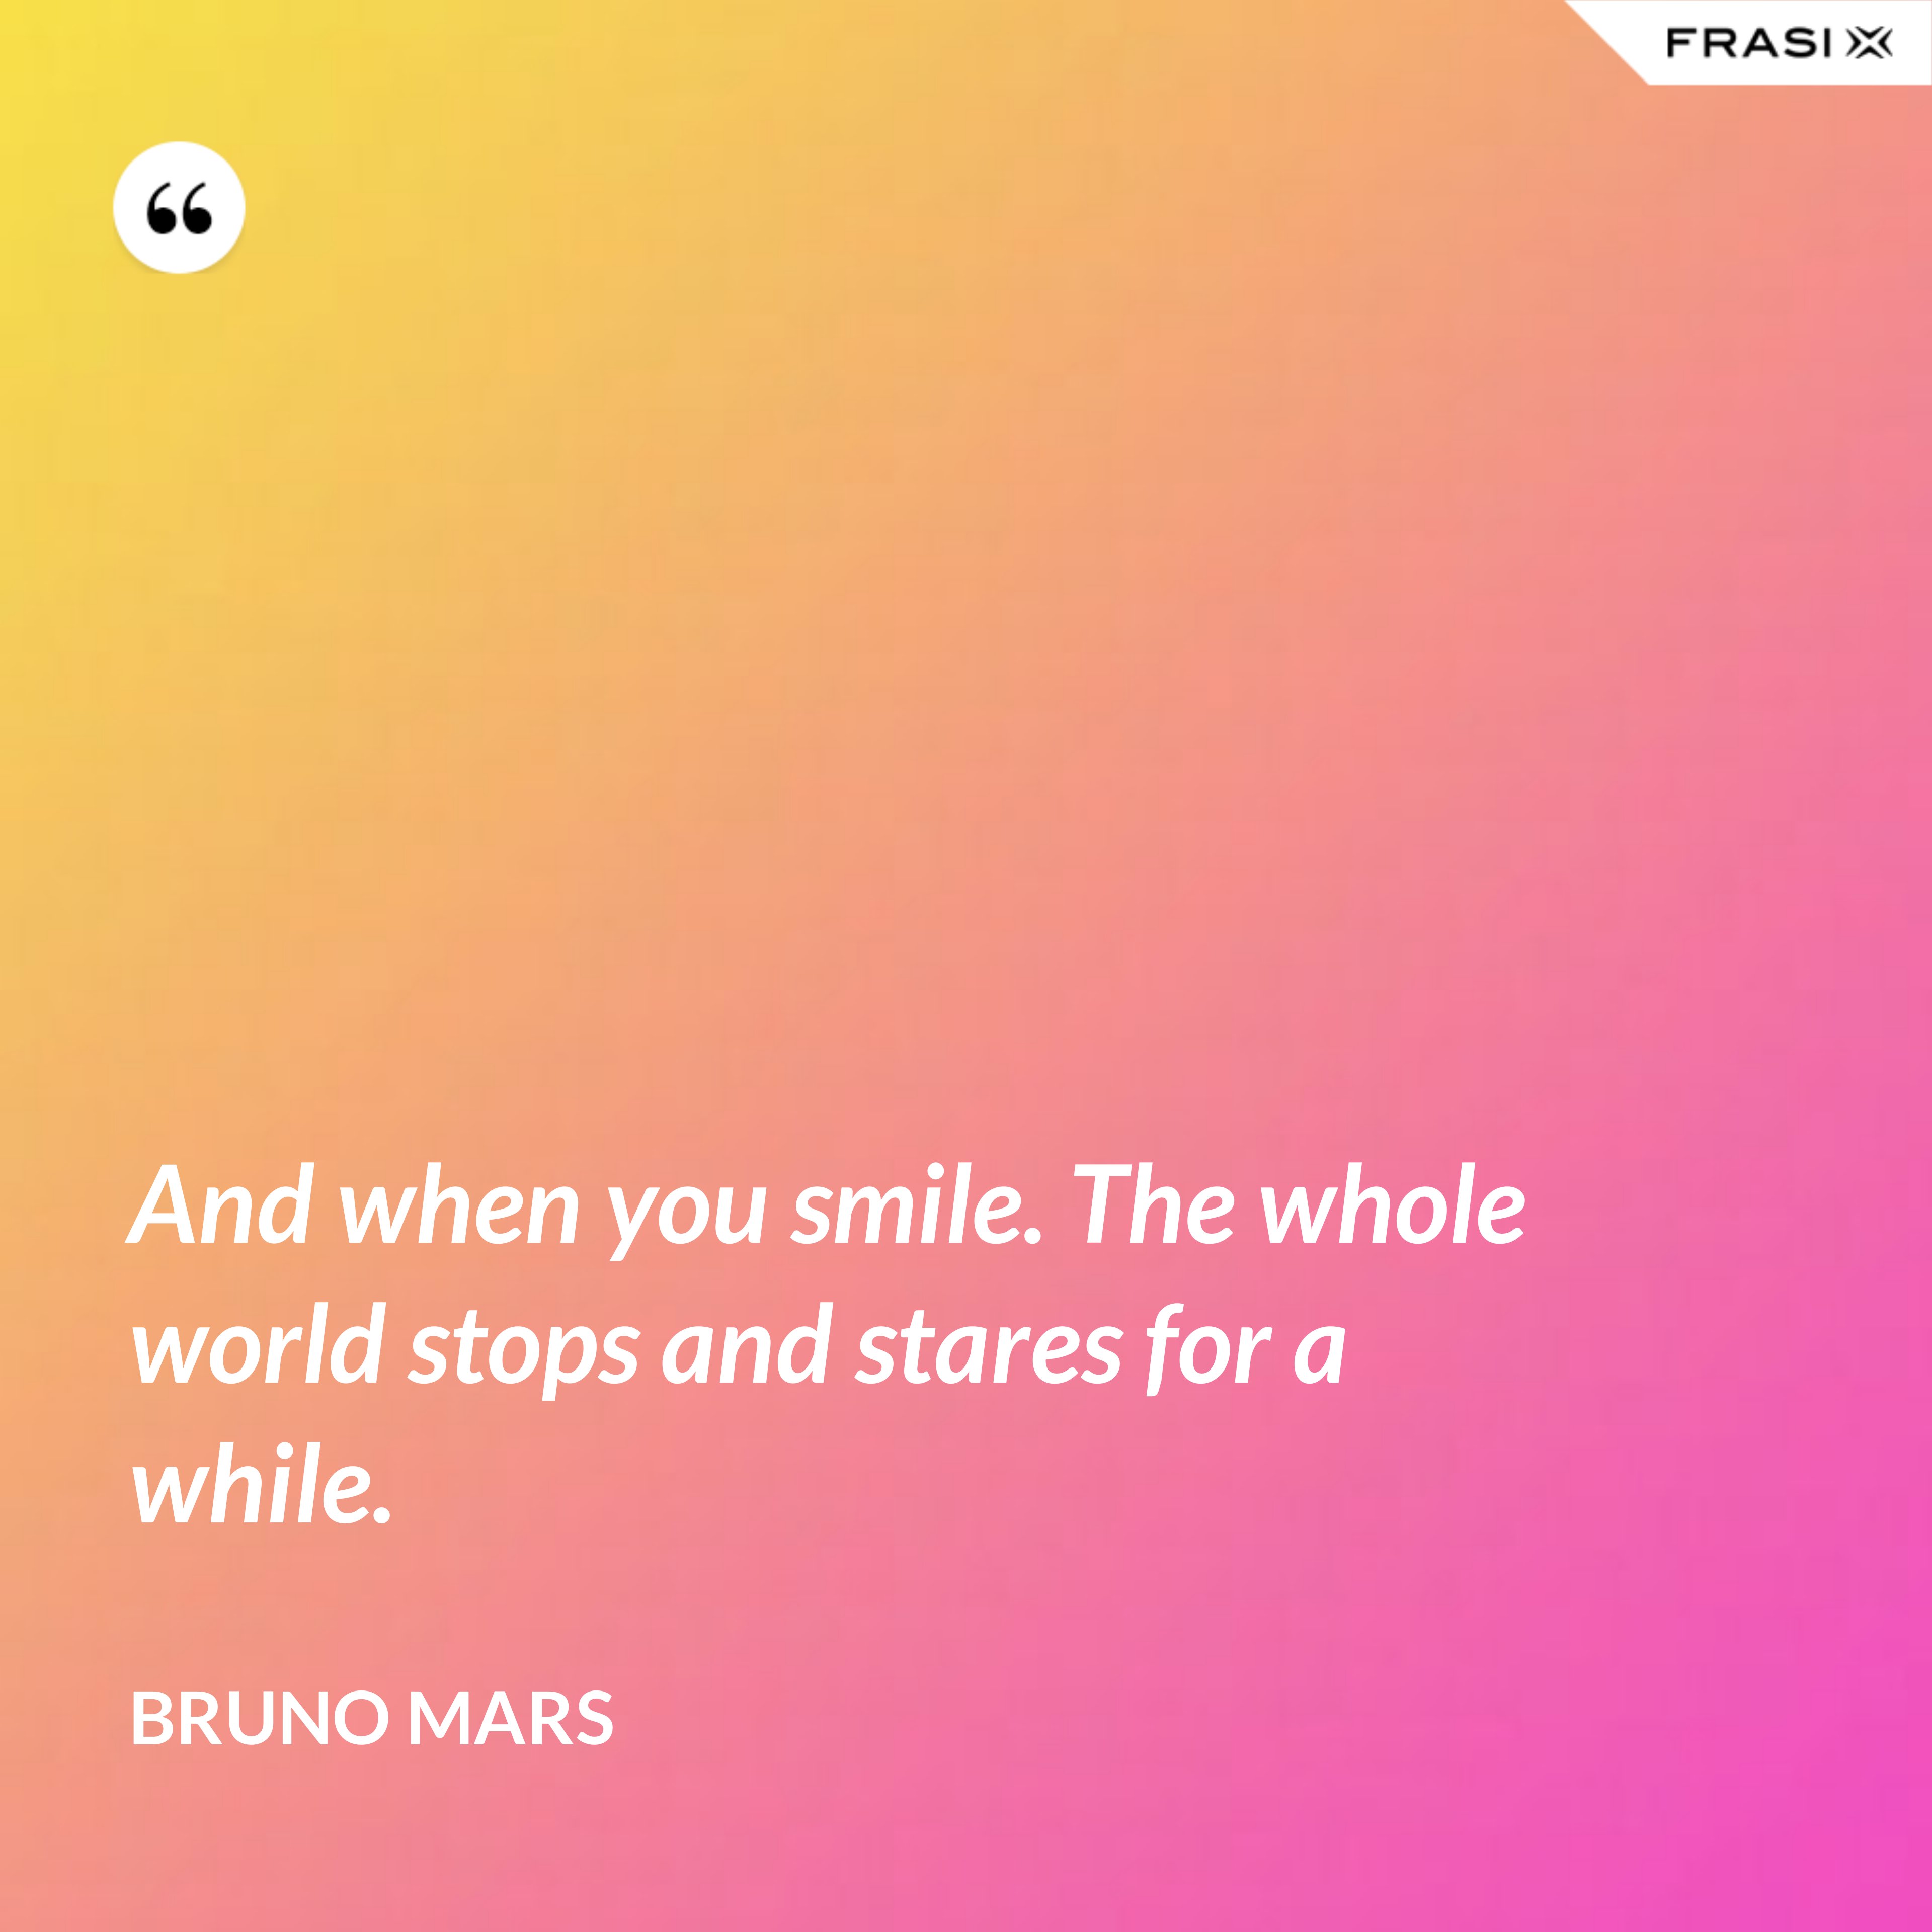 And when you smile. The whole world stops and stares for a while. - Bruno Mars